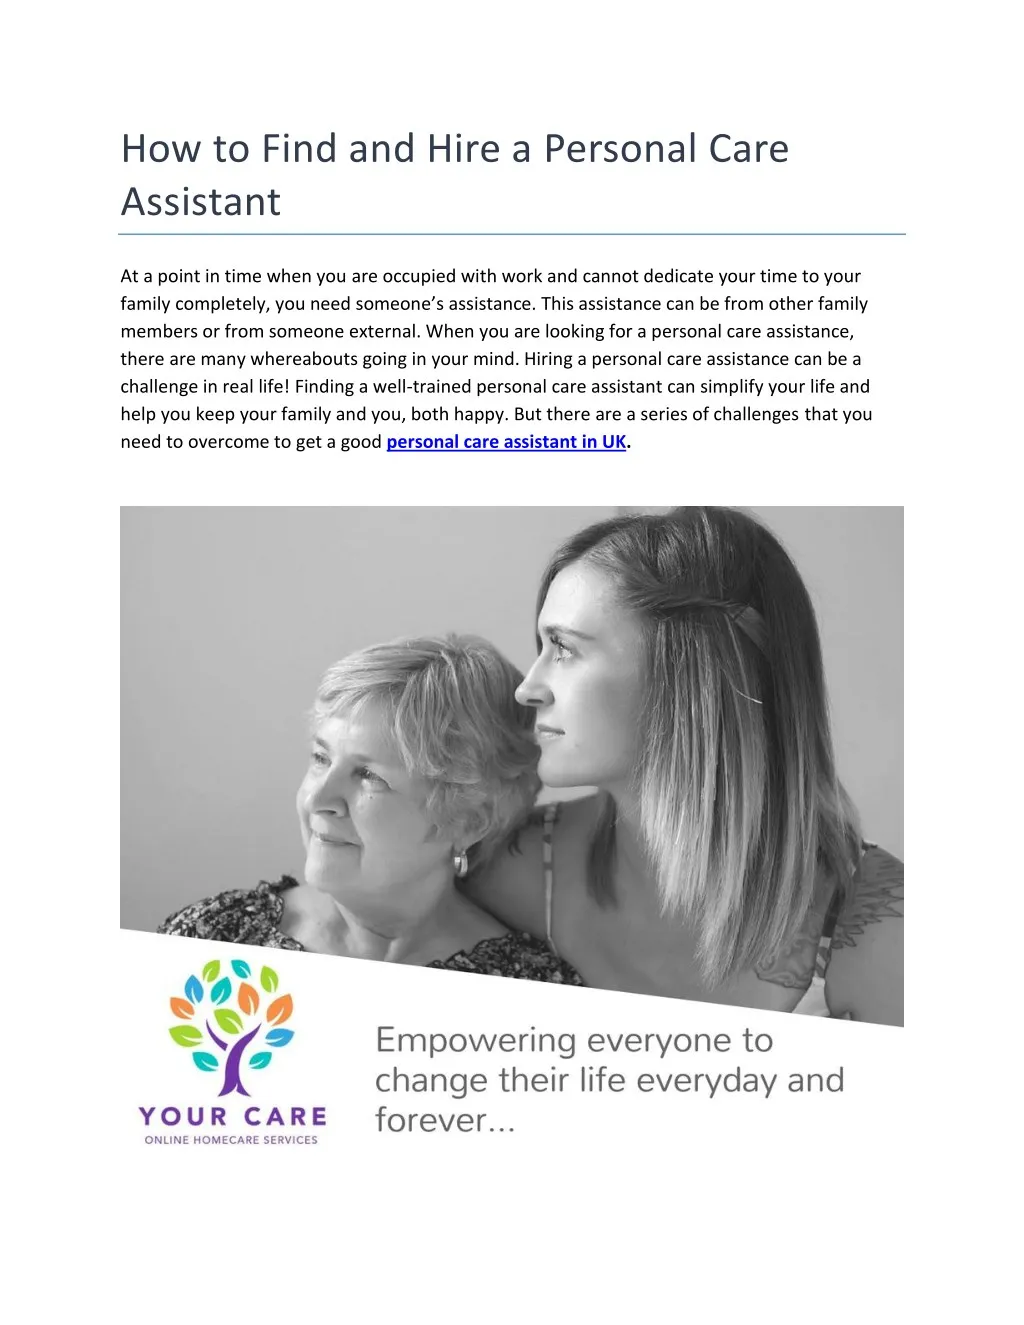 how to find and hire a personal care assistant